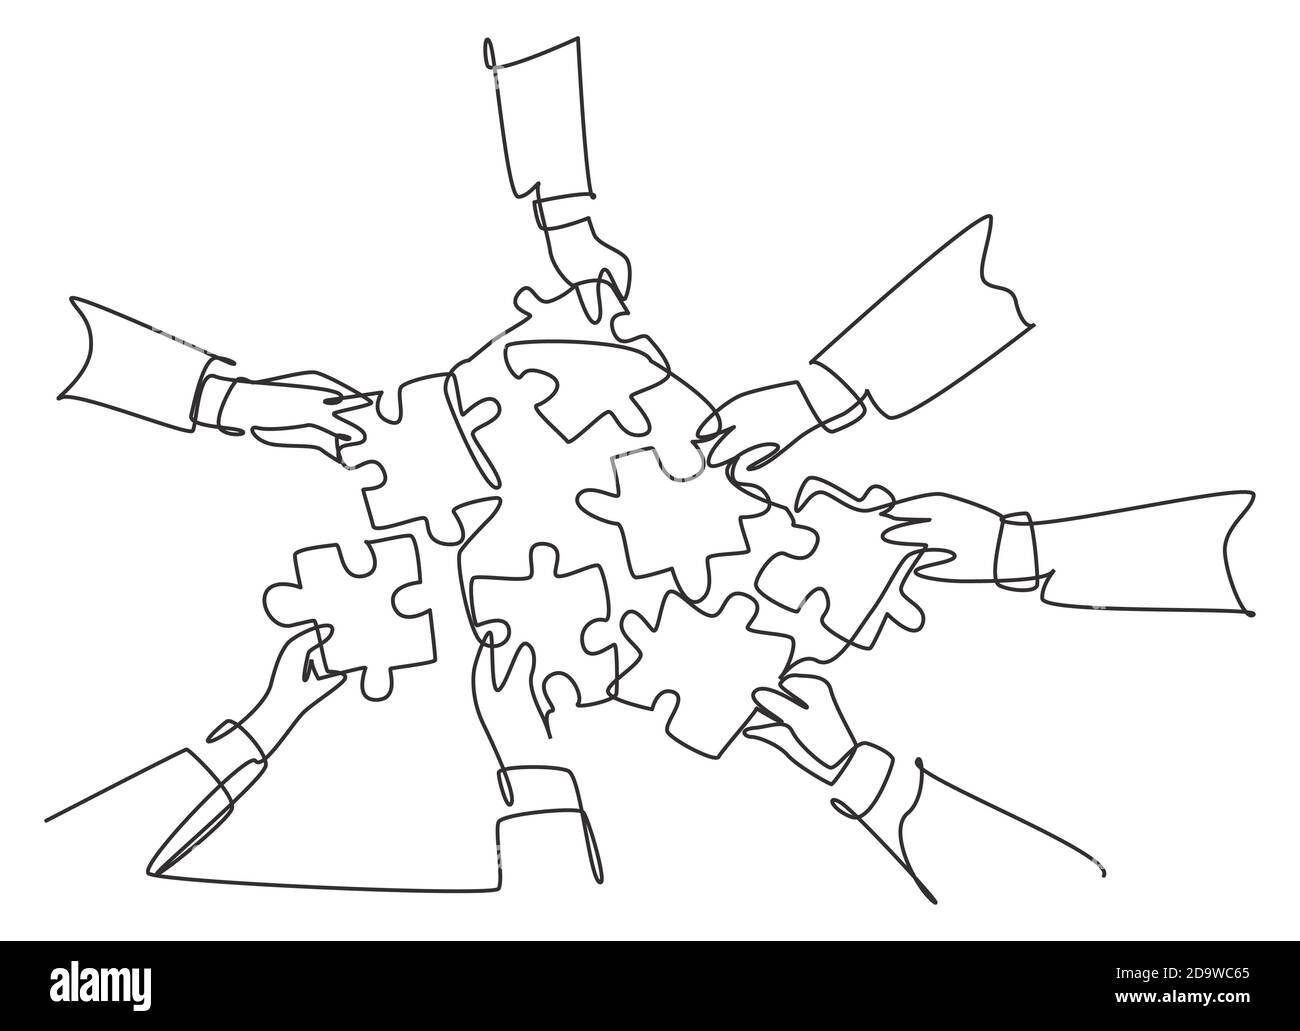 Single continuous line drawing of team members holding hands together  following their leader who hold flag climbing up stairs step by step  Teamwork Stock Vector Image  Art  Alamy